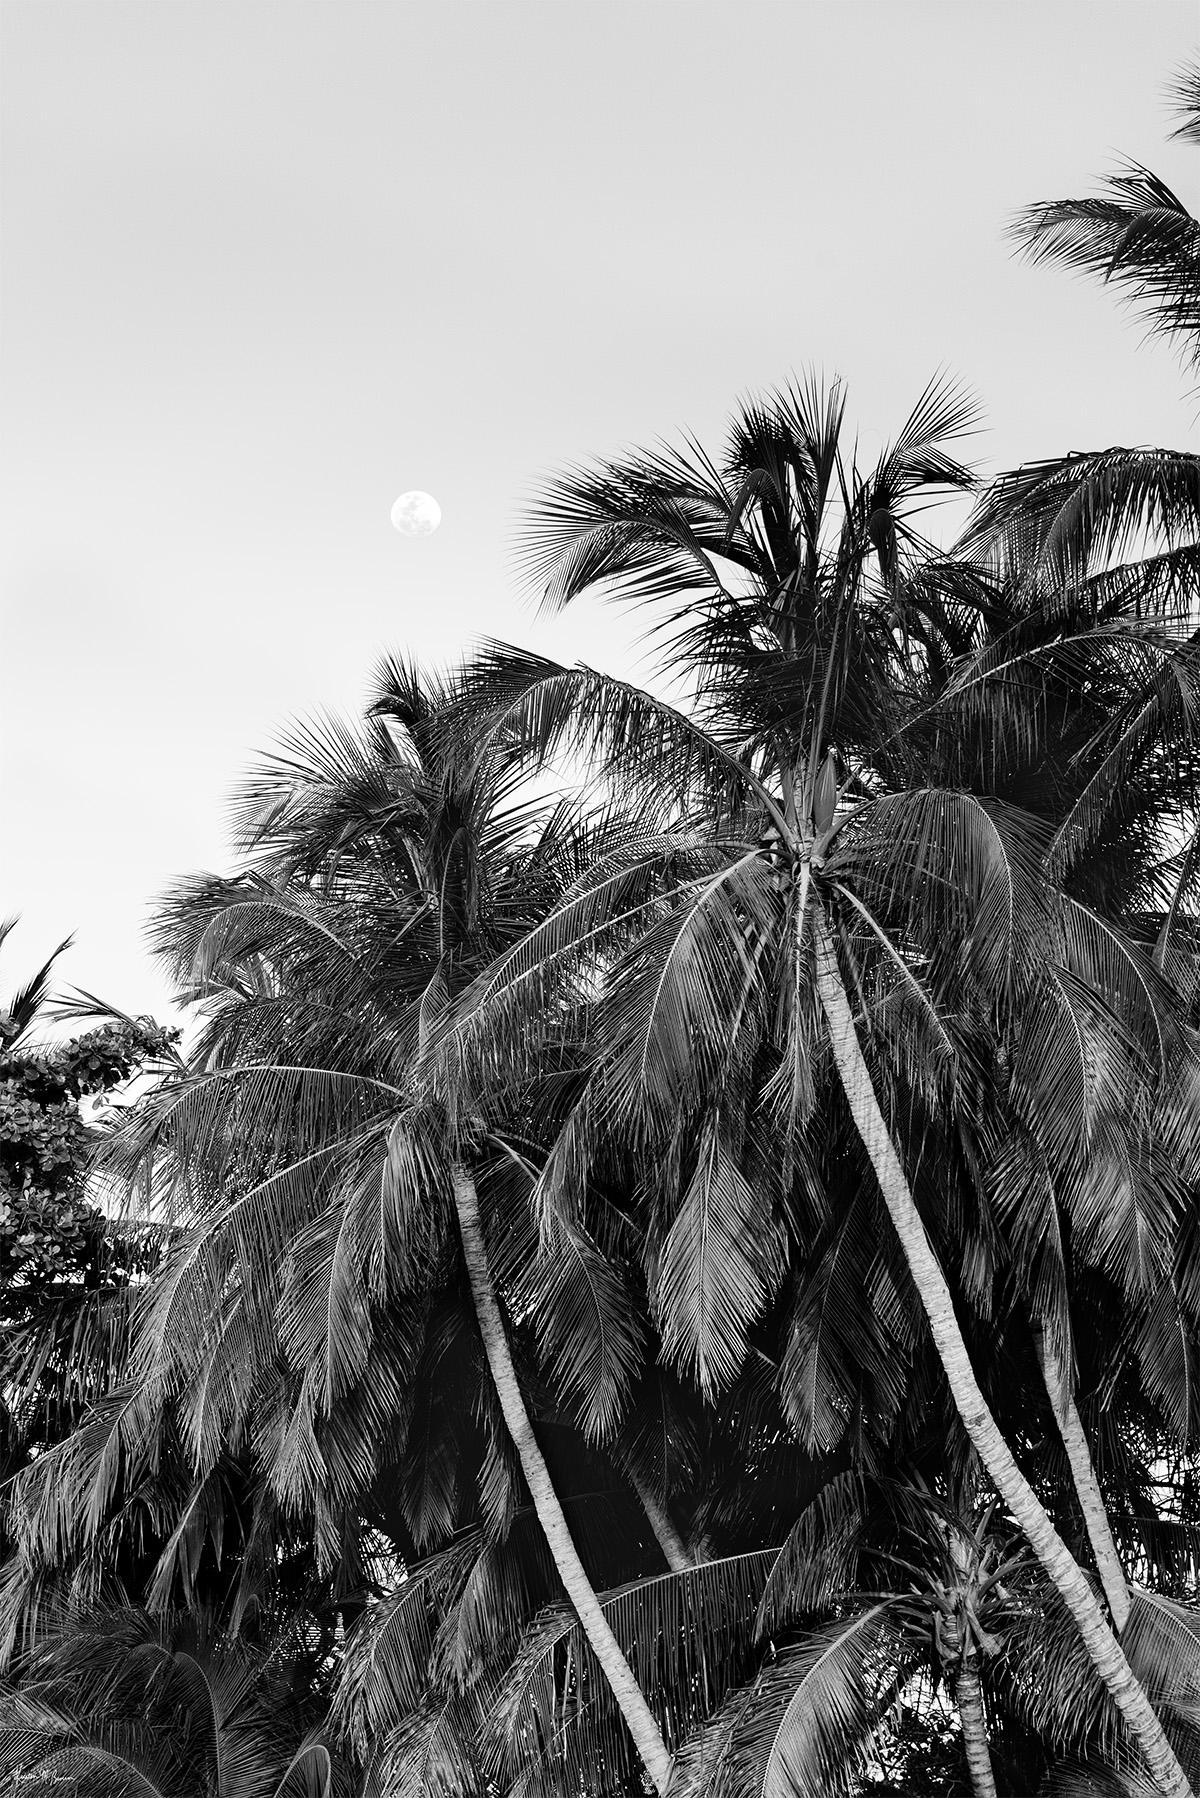 Kristen Brown Black and White Photograph - Make a Wish Upon the Palms